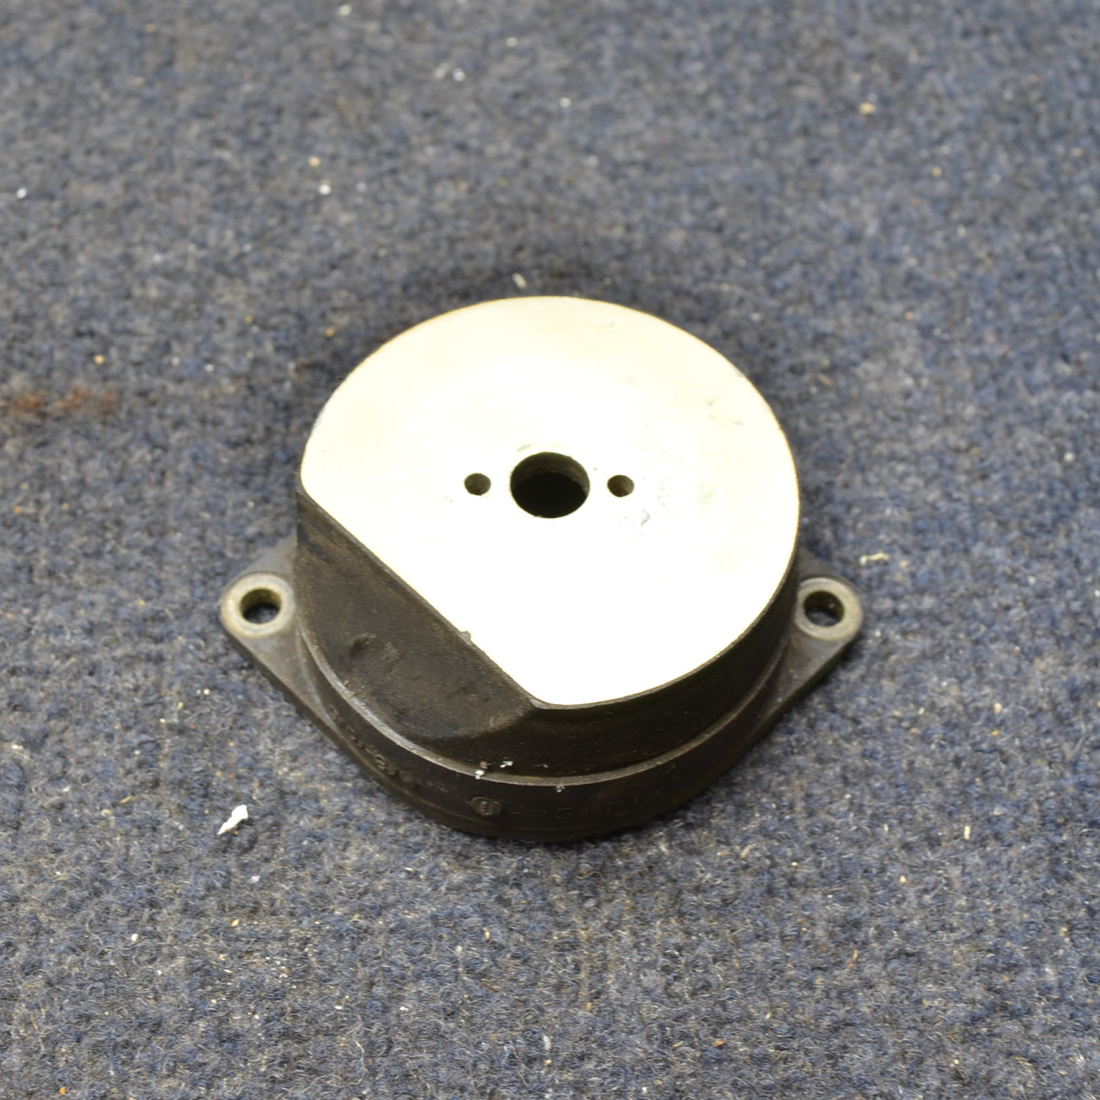 Used aircraft parts for sale, J-124540-1 Lord  [part_model] Cessna 210 LORD ENGINE SHOCK MOUNT PRICE PER EACH